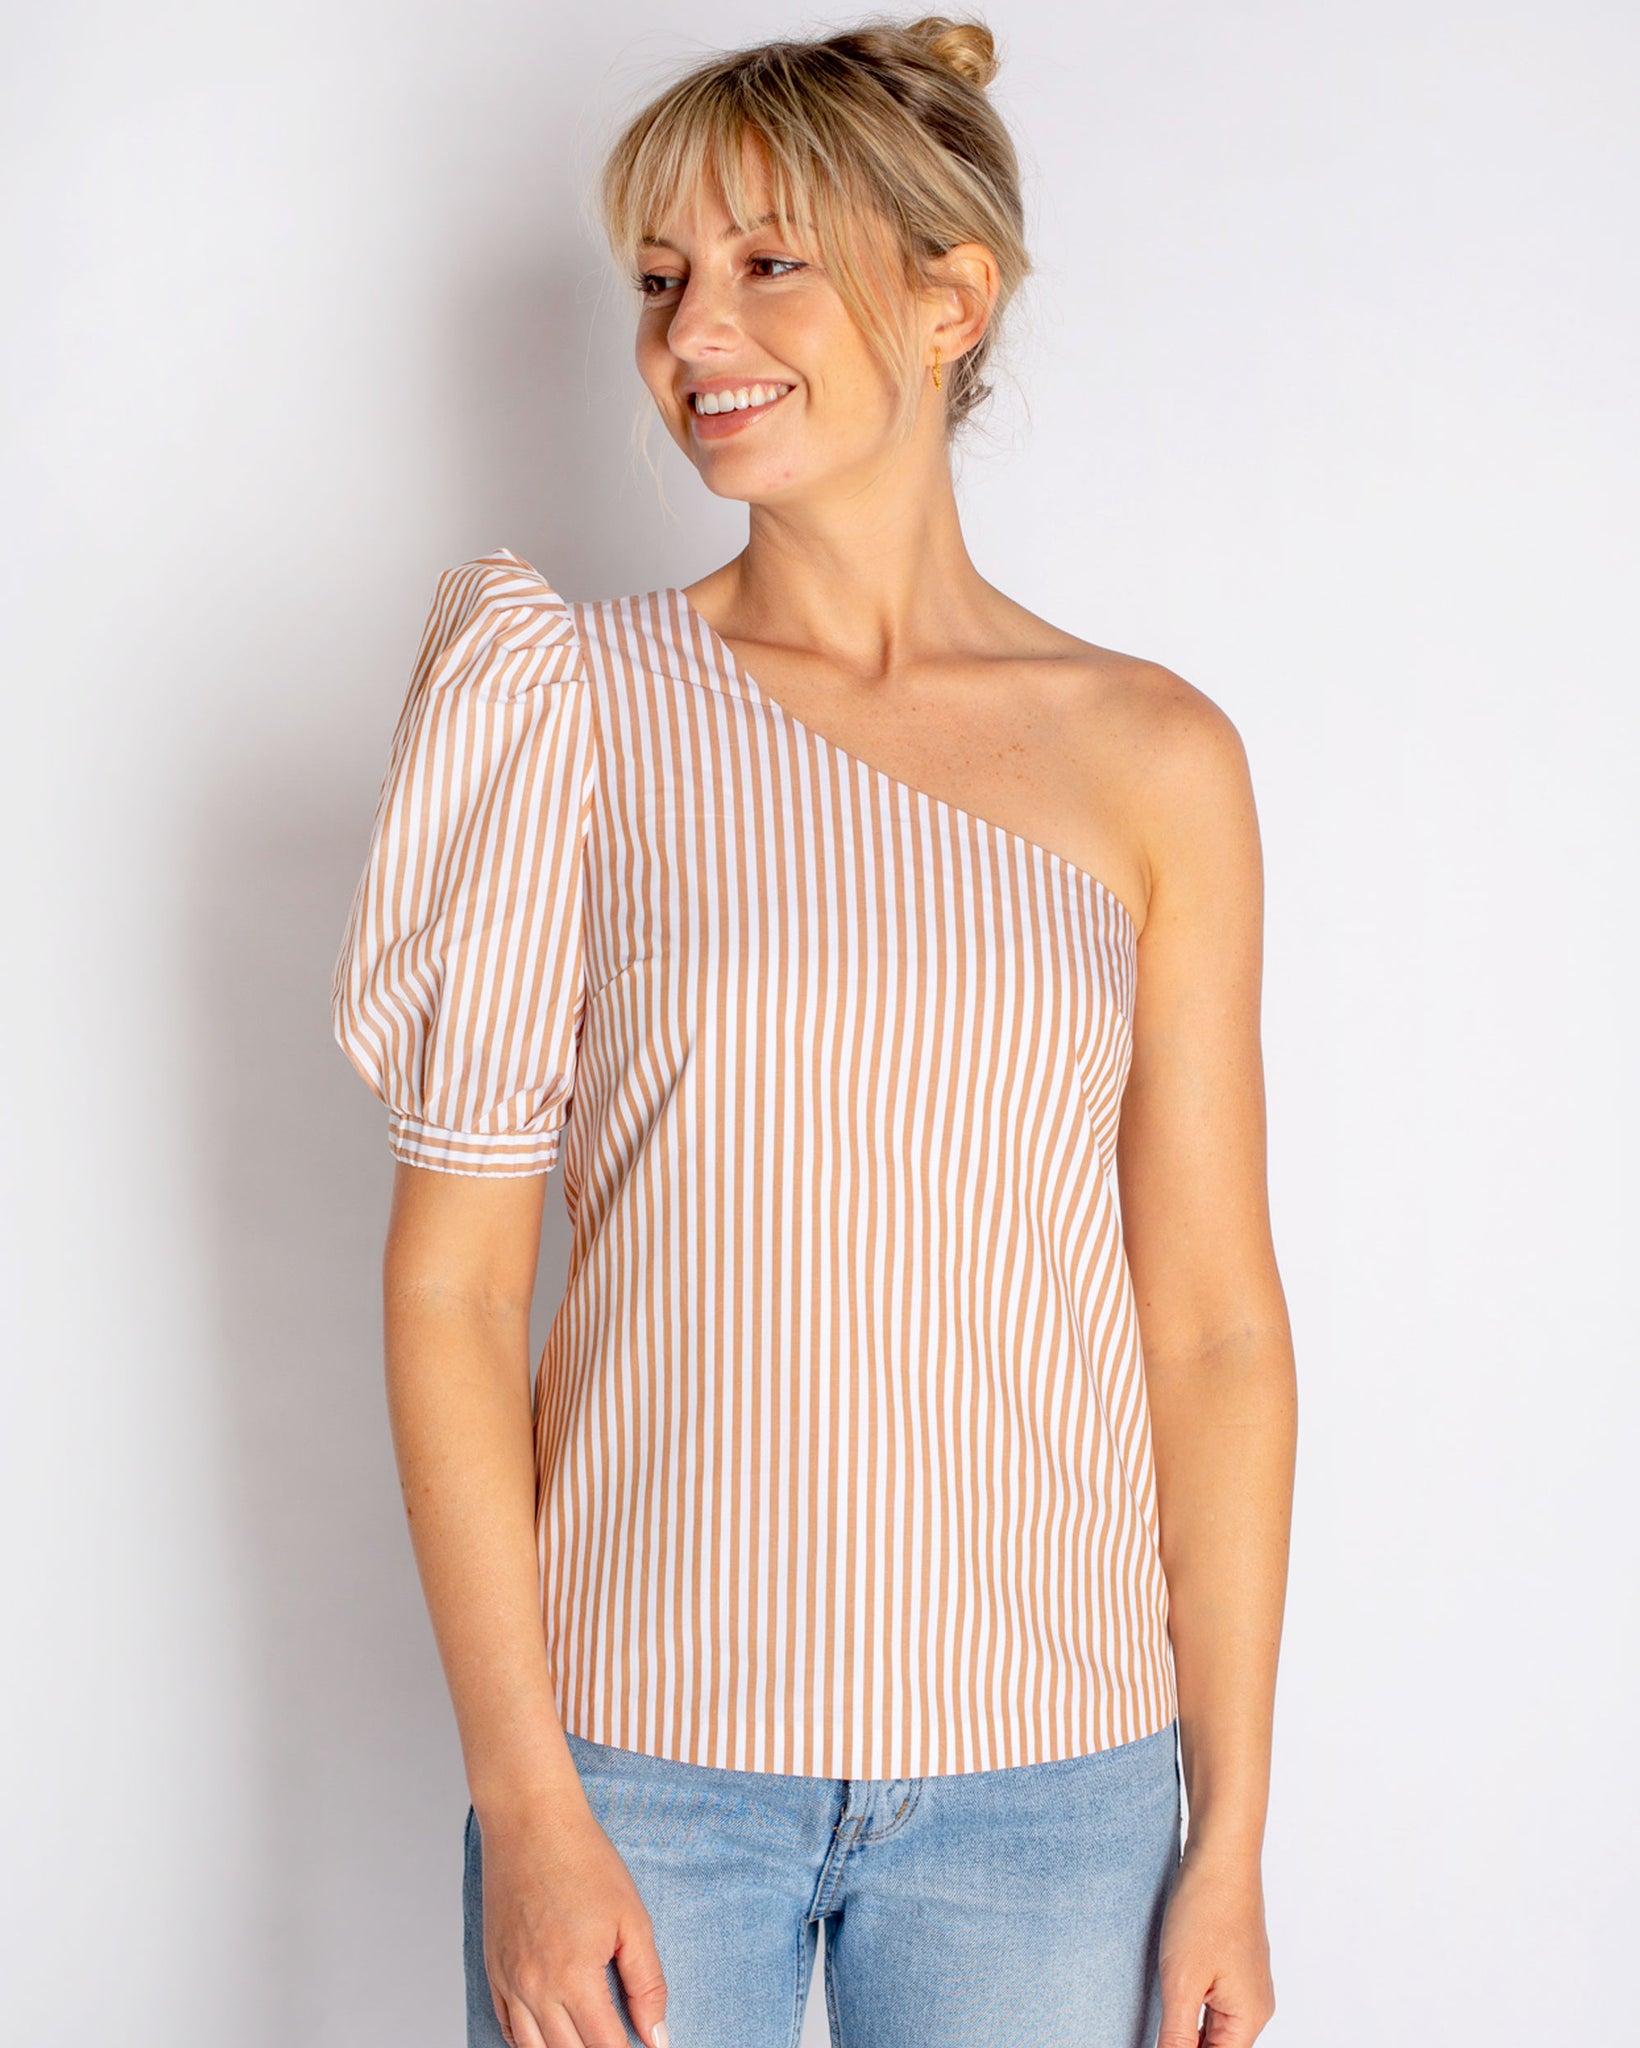 The Ava Top in Cotton- SALE